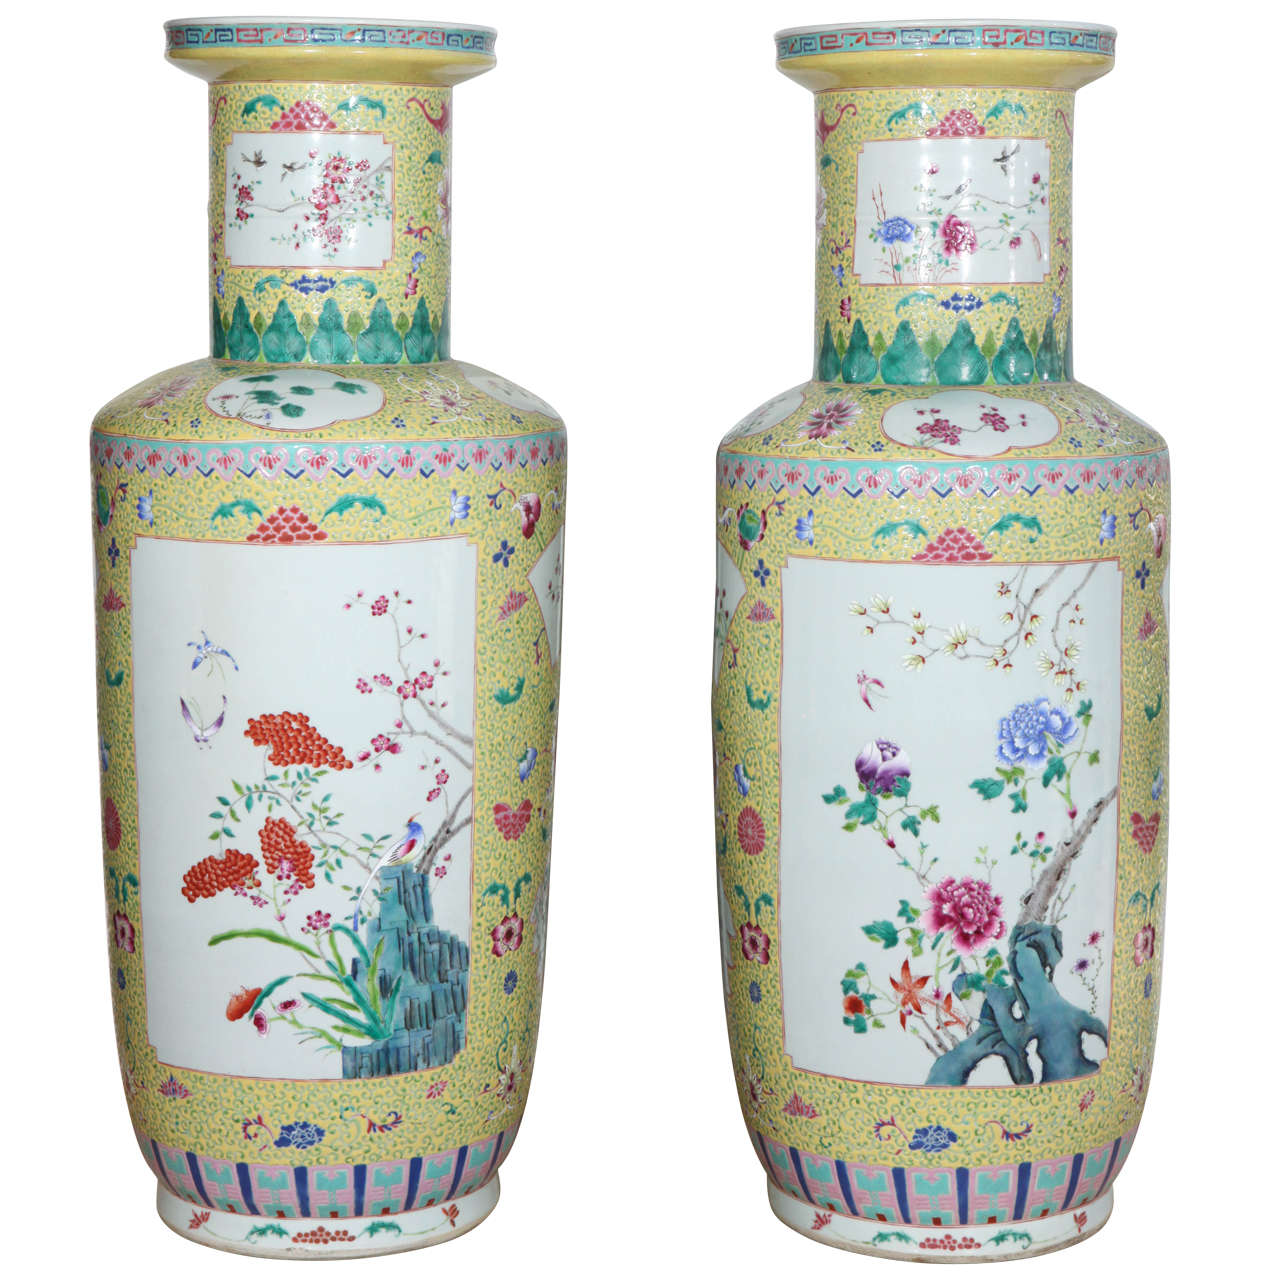 Pair of Famille Rose Style Urns